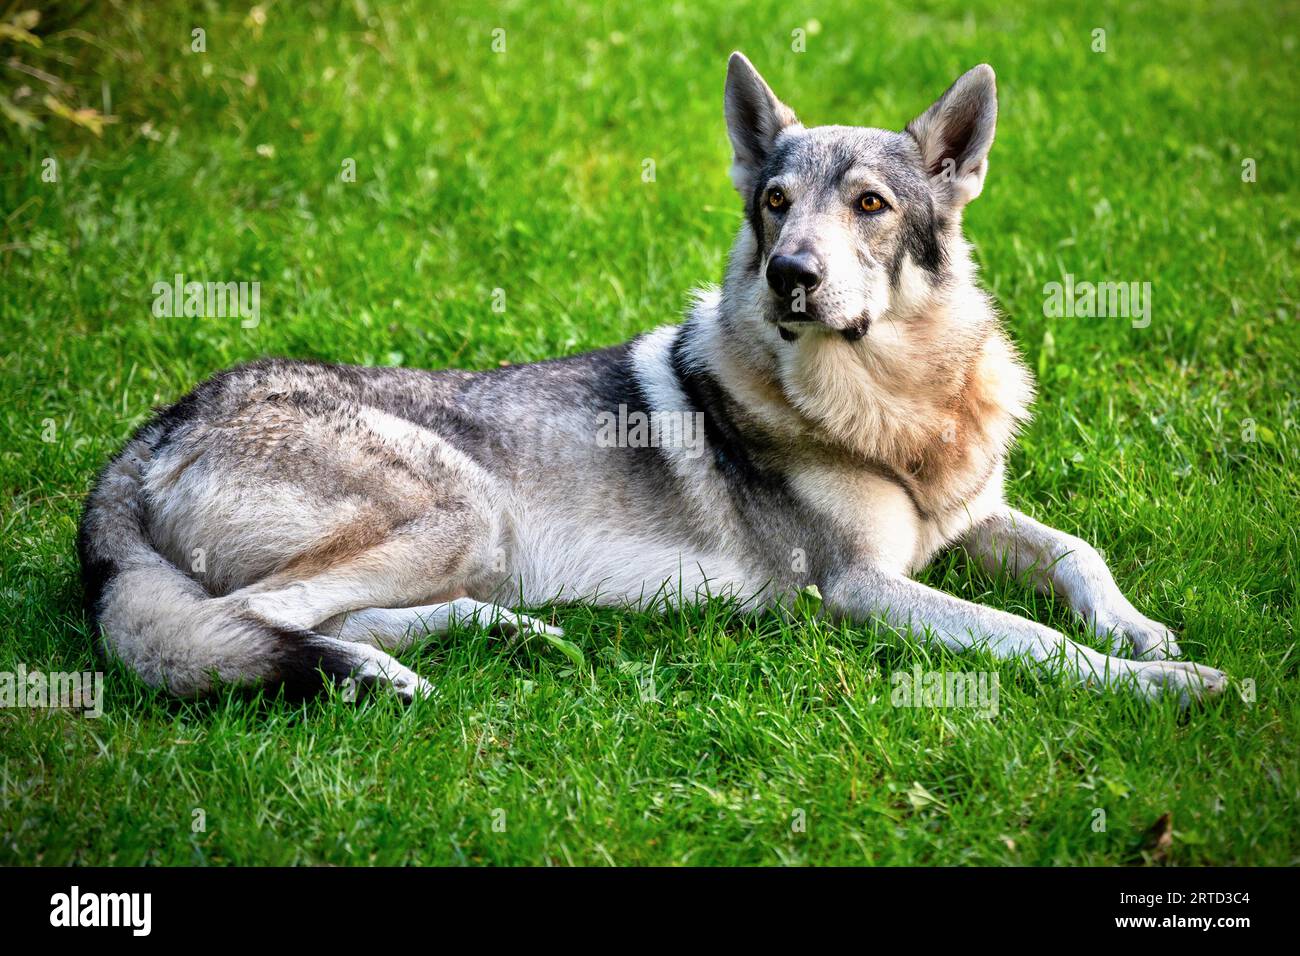 Adult young dog, Czechoslovak wolfdog in green grass. Working and persistent dog, beautiful appearance. Stock Photo